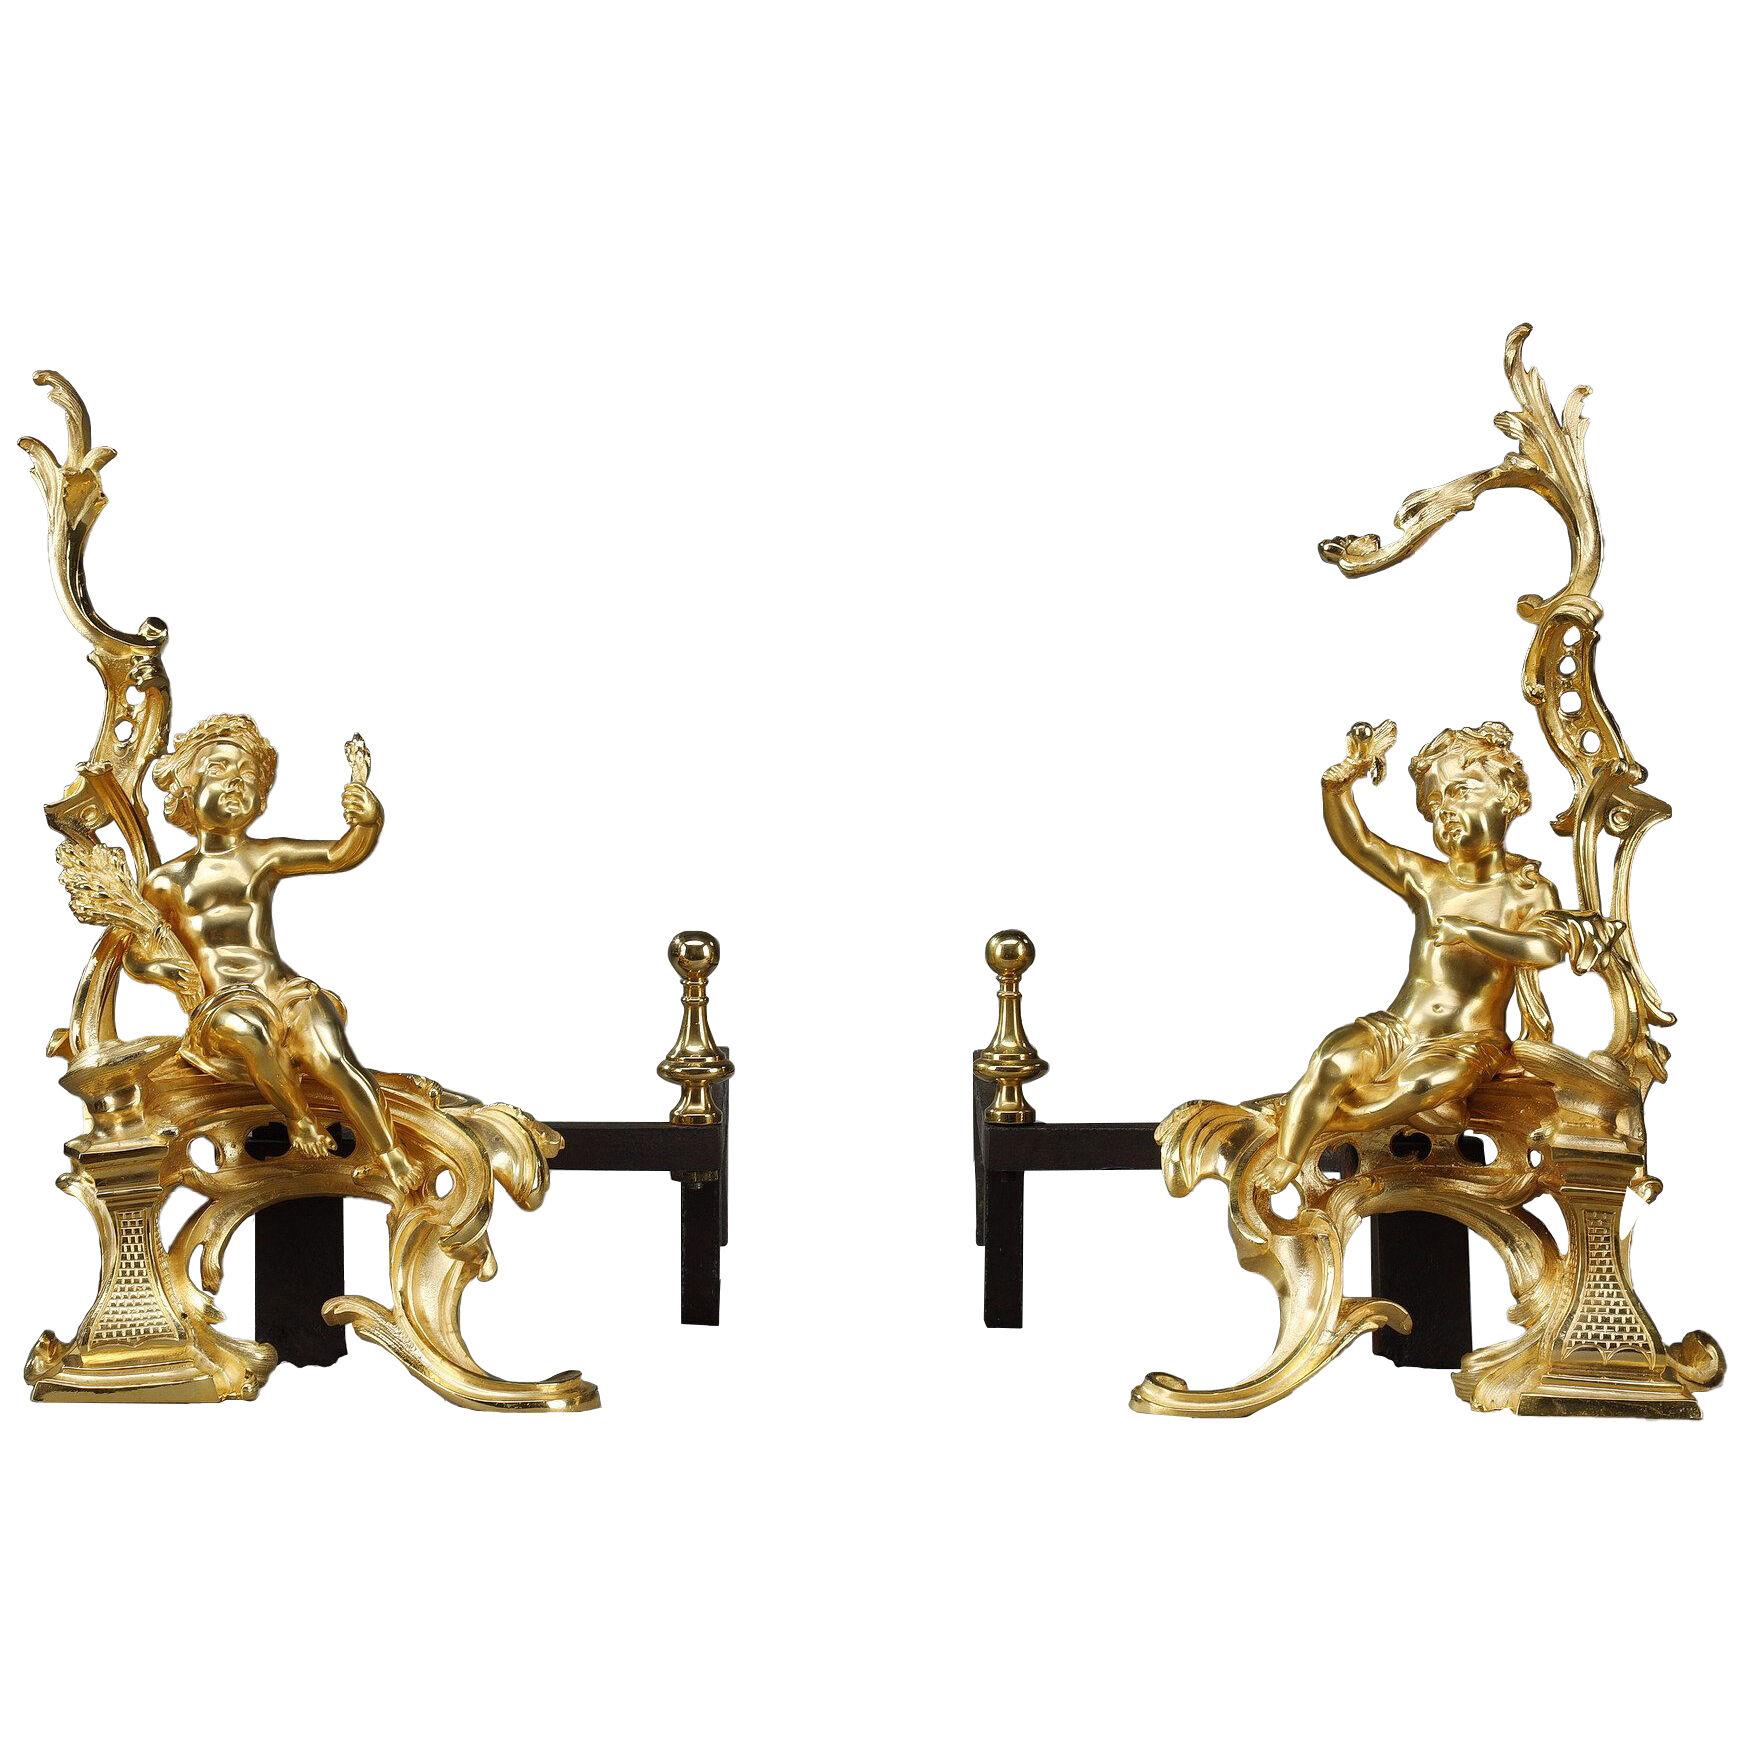 Pair of gilded bronze andirons in Louis XV style